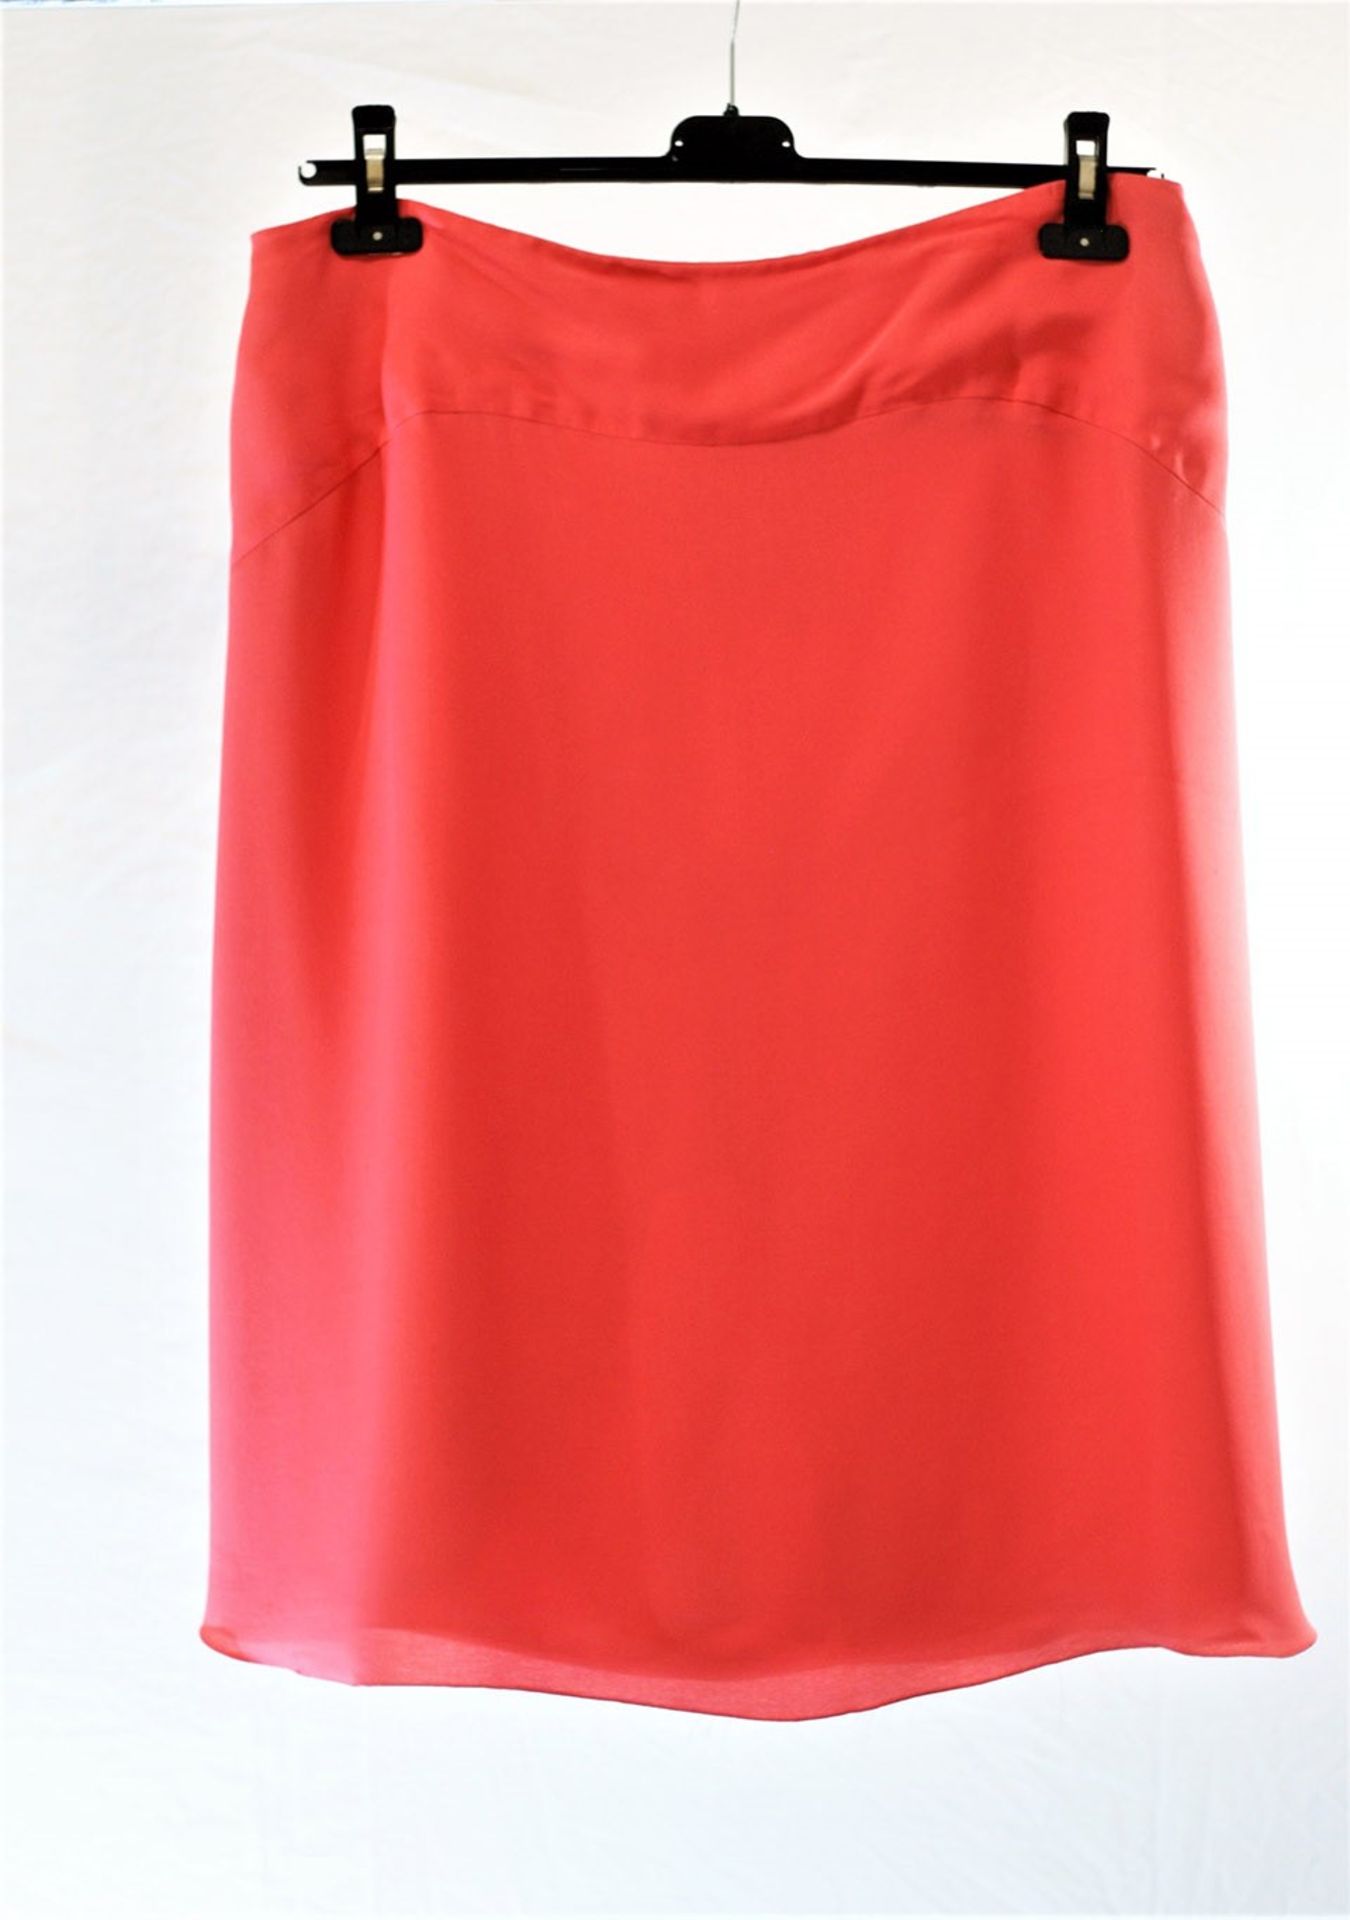 1 x Valentino Fuscia Skirt - Size: 20 - Material: 55% Acetate, 30% Nylon, 15% Silk - From a High End